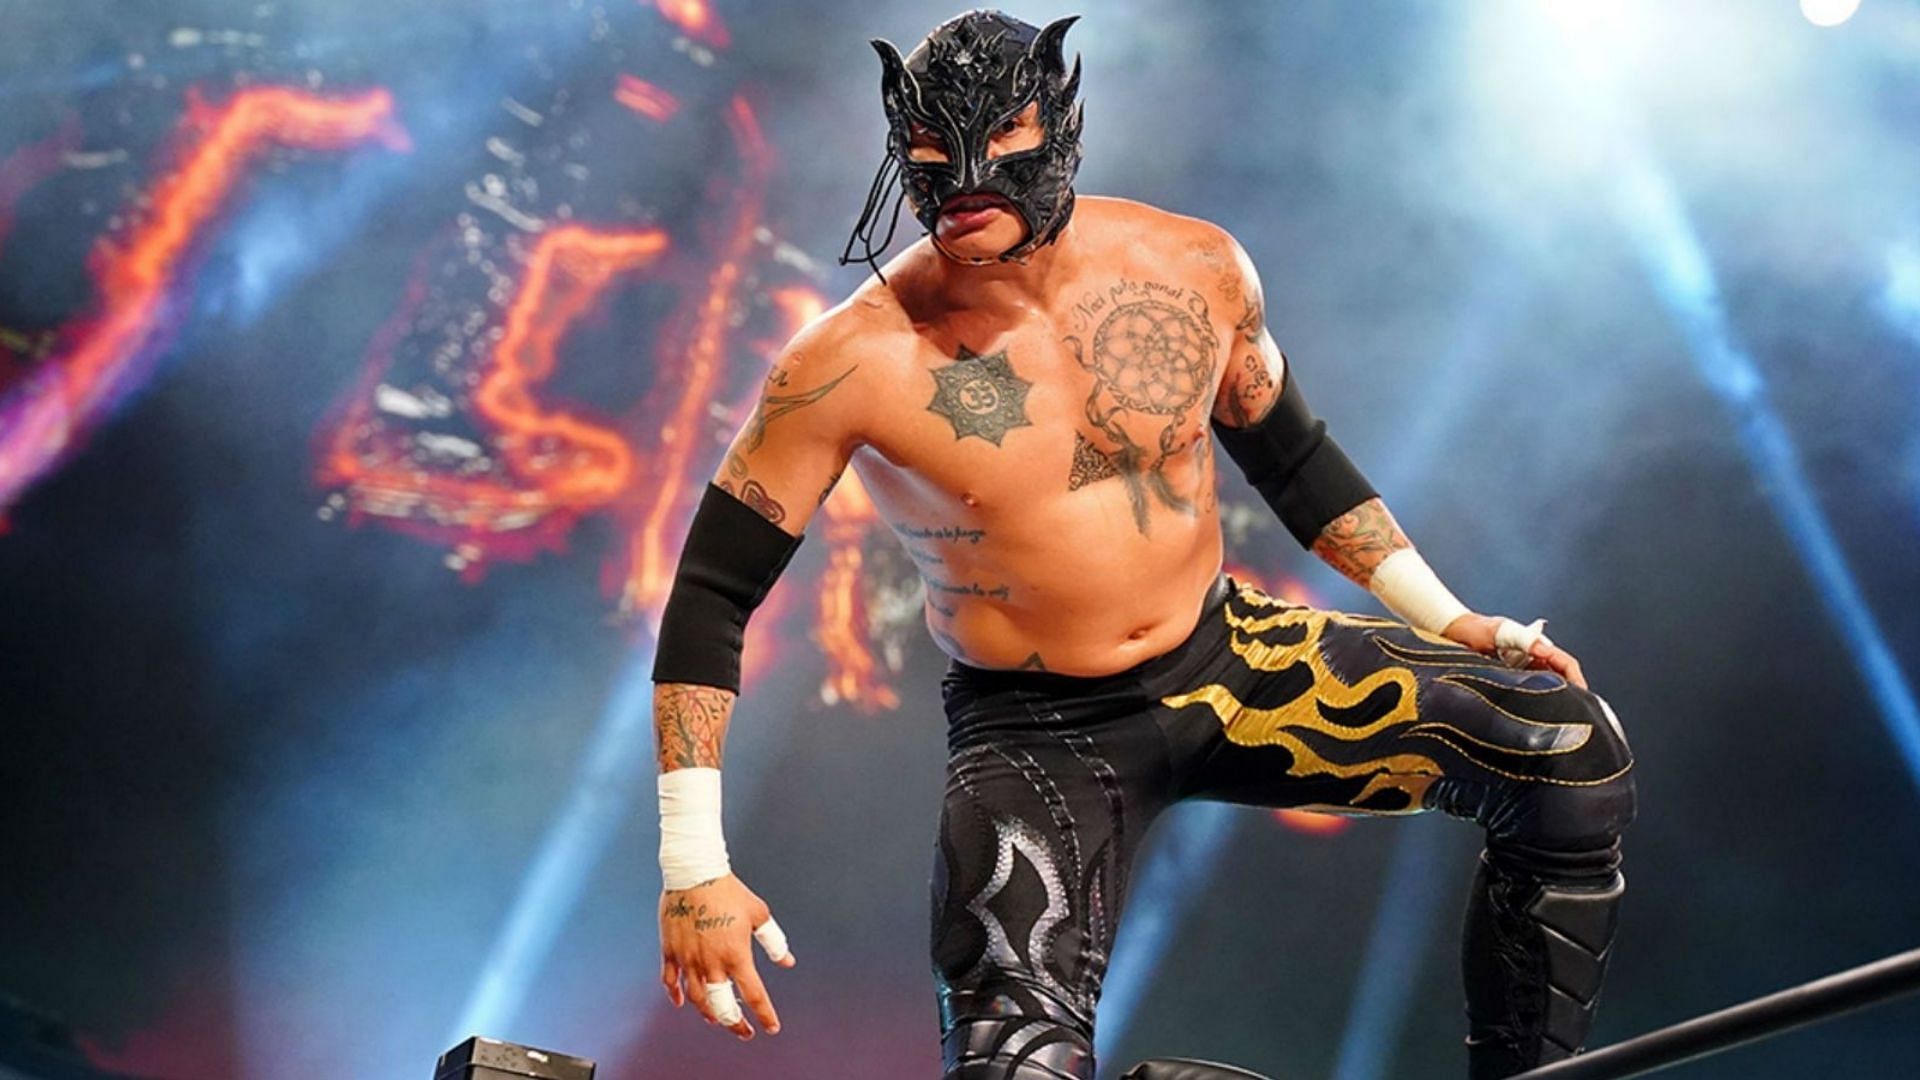 Fenix sustained his injury on the January 5th episode of AEW Dynamite